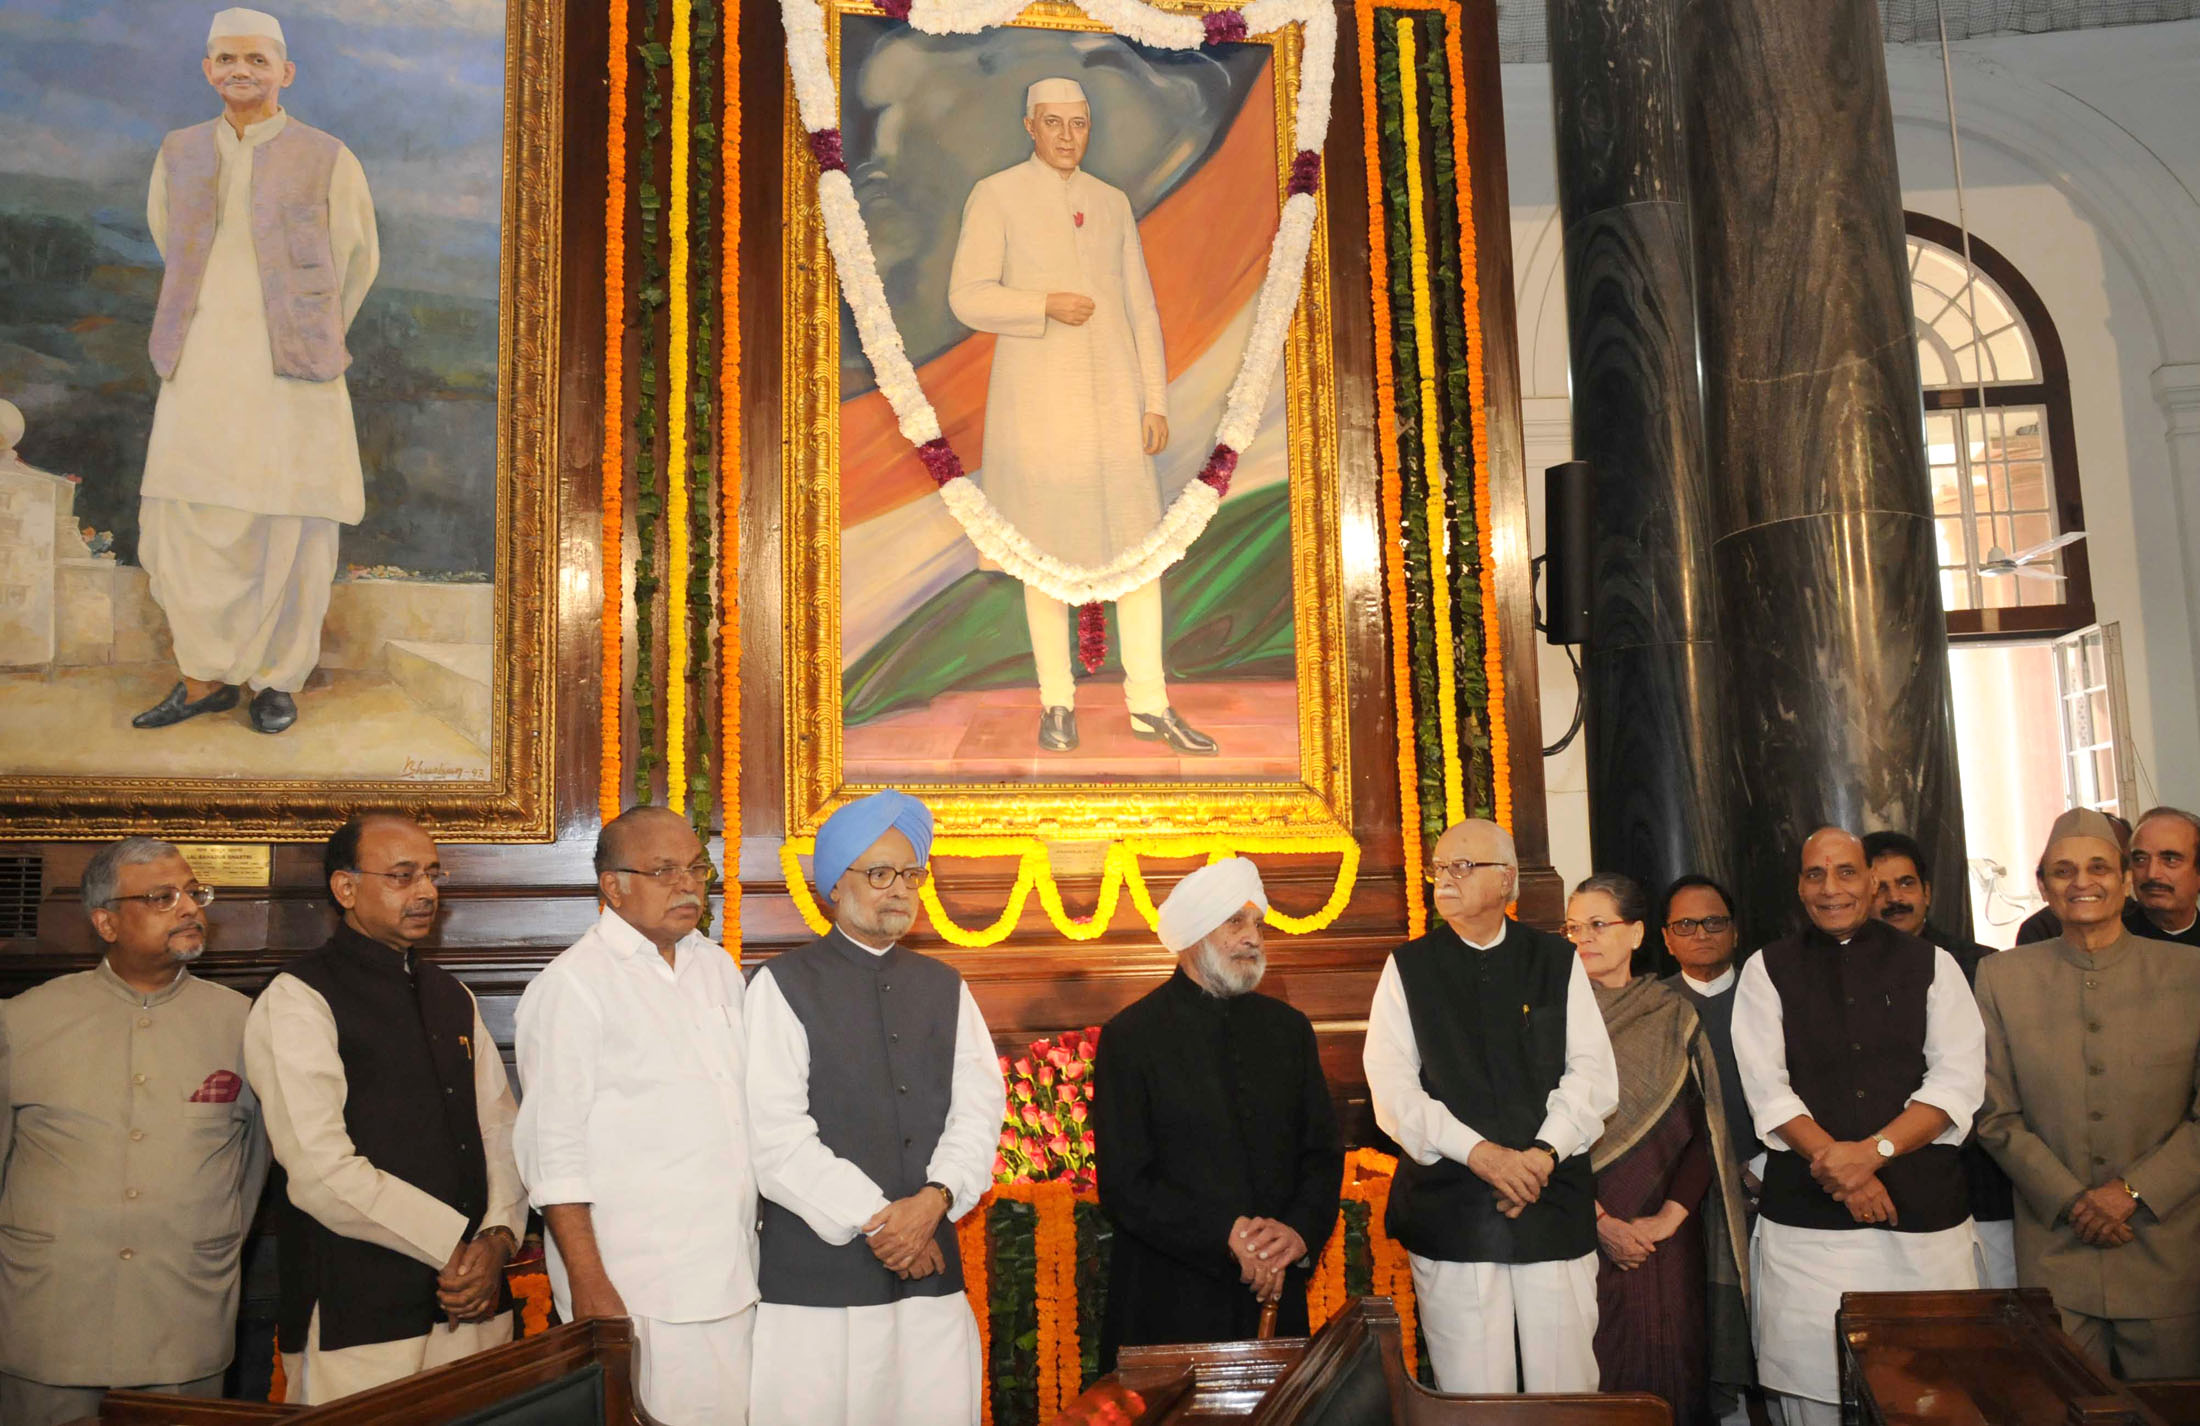 The Union Home Minister, Shri Rajnath Singh, the former Prime Minister, Dr. Manmohan Singh and other dignitaries paid tributes to the former Prime Minister, Pandit Jawaharlal Nehru on his 126th birth anniversary, at Parliament House, in New Delhi on November 14, 2015.